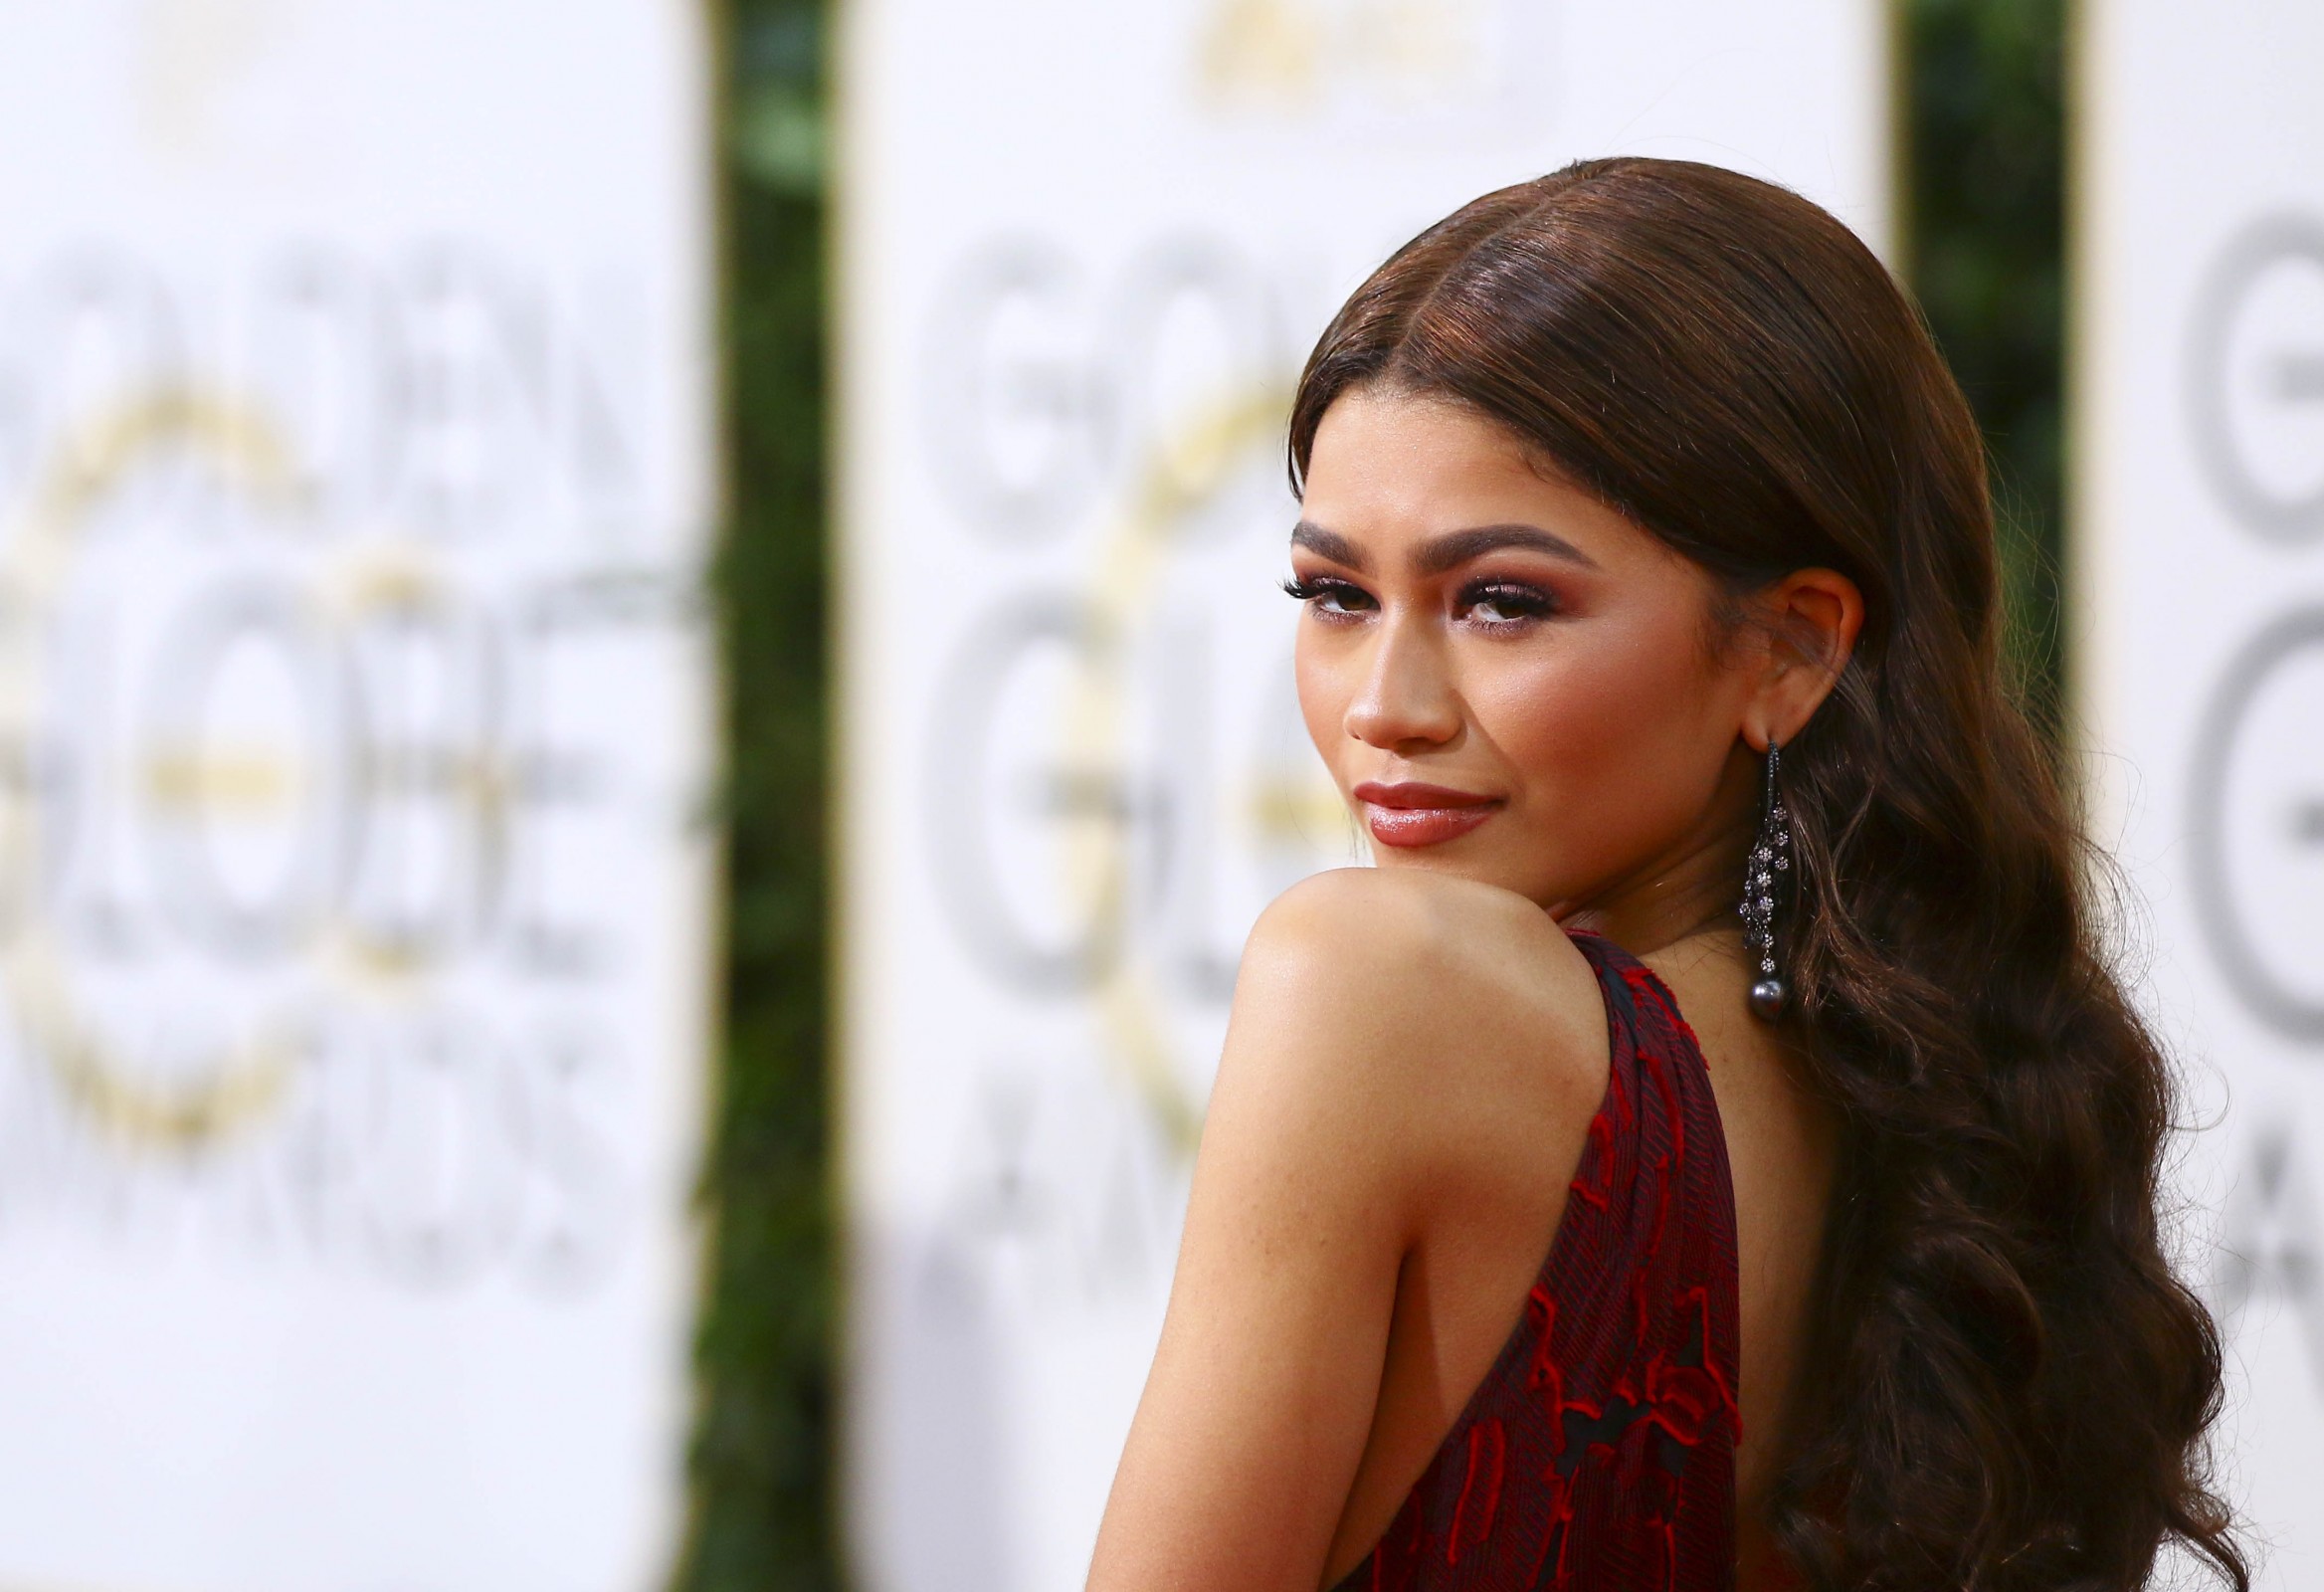 Beauty Trends At The 73rd Golden Globe Awards - MOJEH